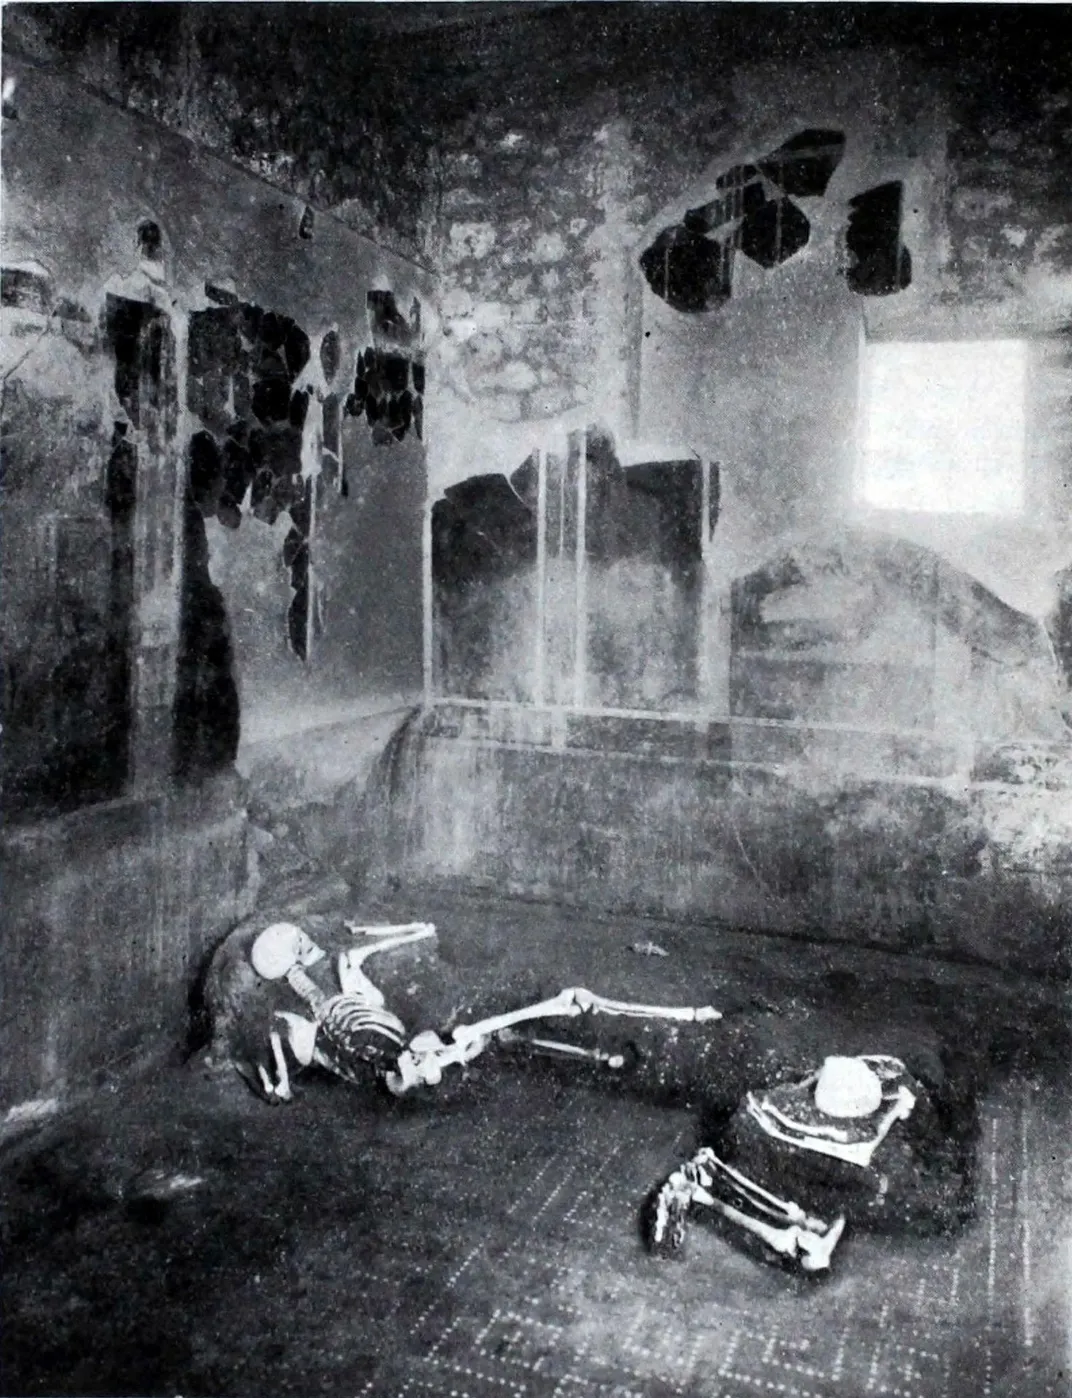 Two skeletons lie in a house in a black-and-white image